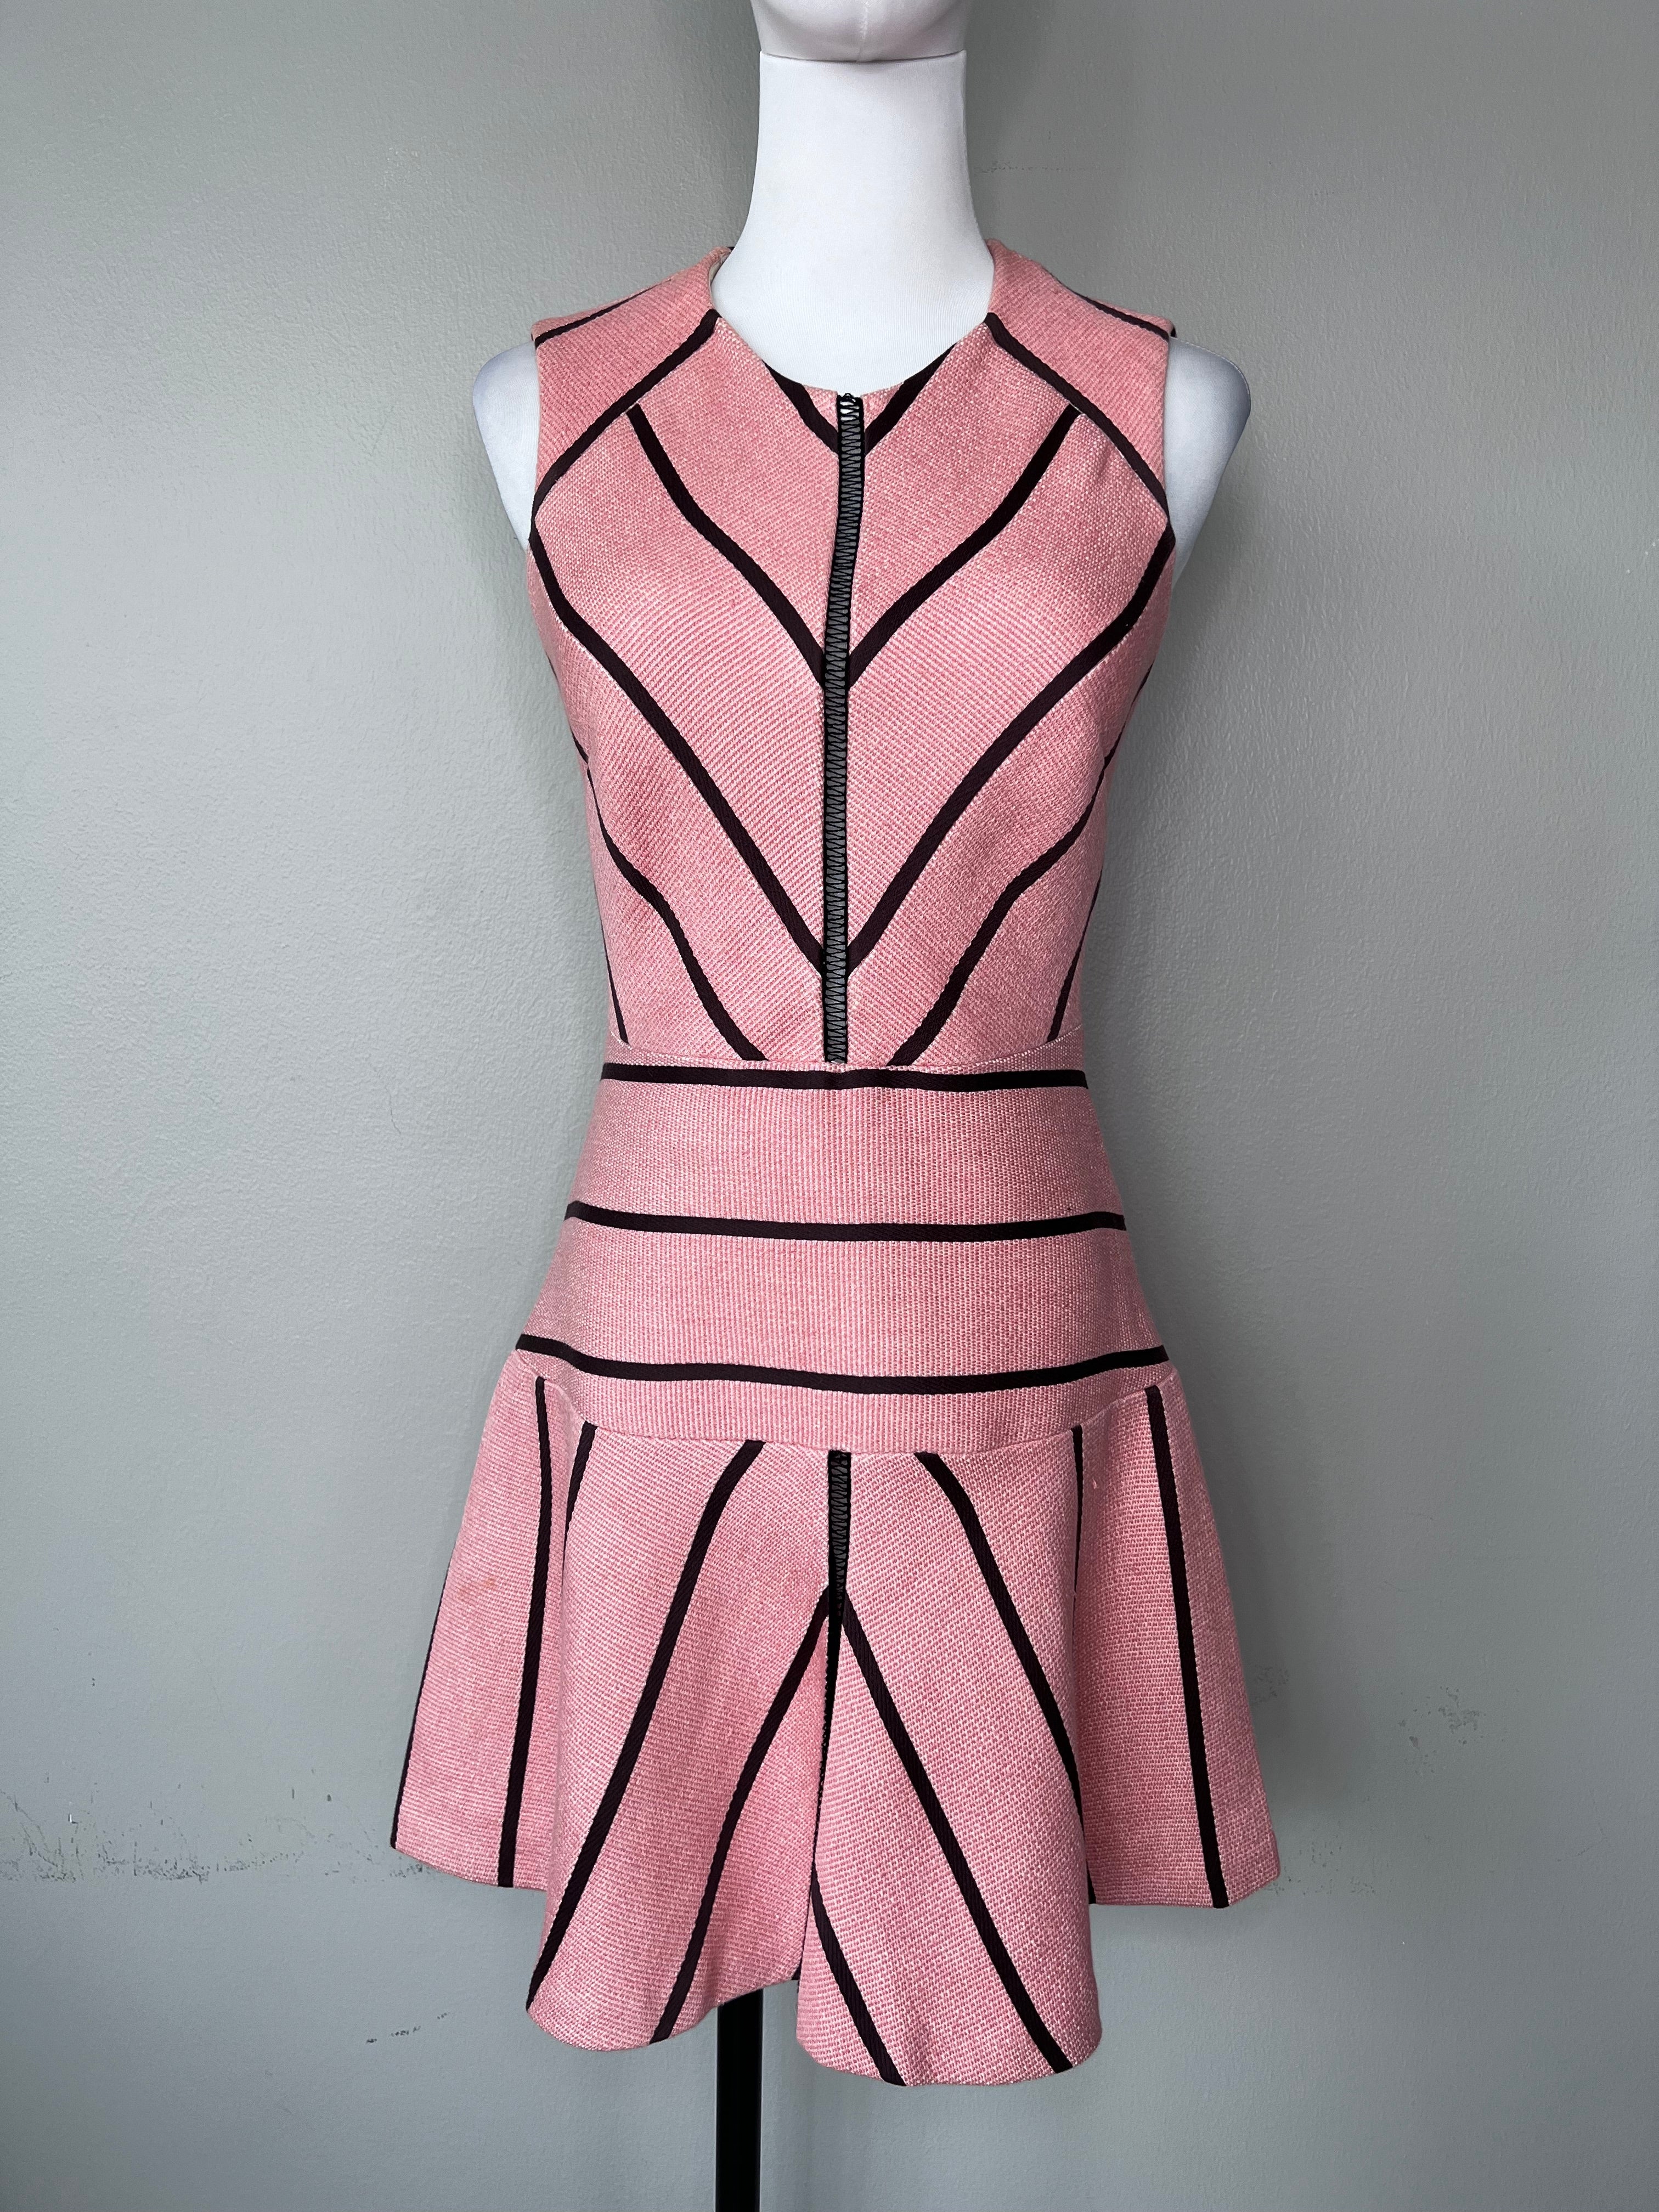 Baby pink A-line dress with brown lining - SANDRO